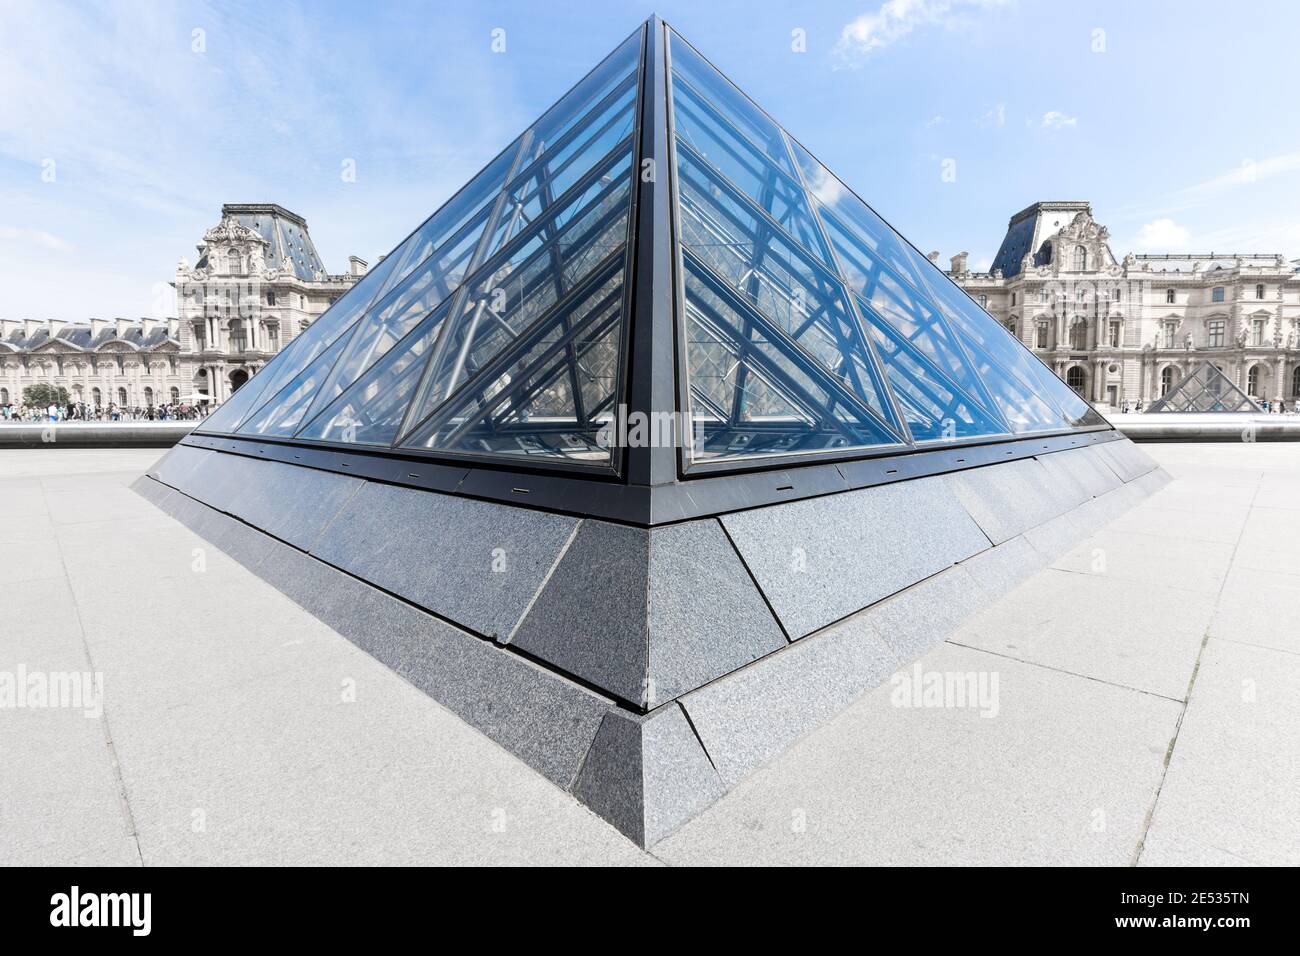 Symmetrical wide angle view of the Louvre Pyramid, under a blue summer sky with sparse clouds Stock Photo